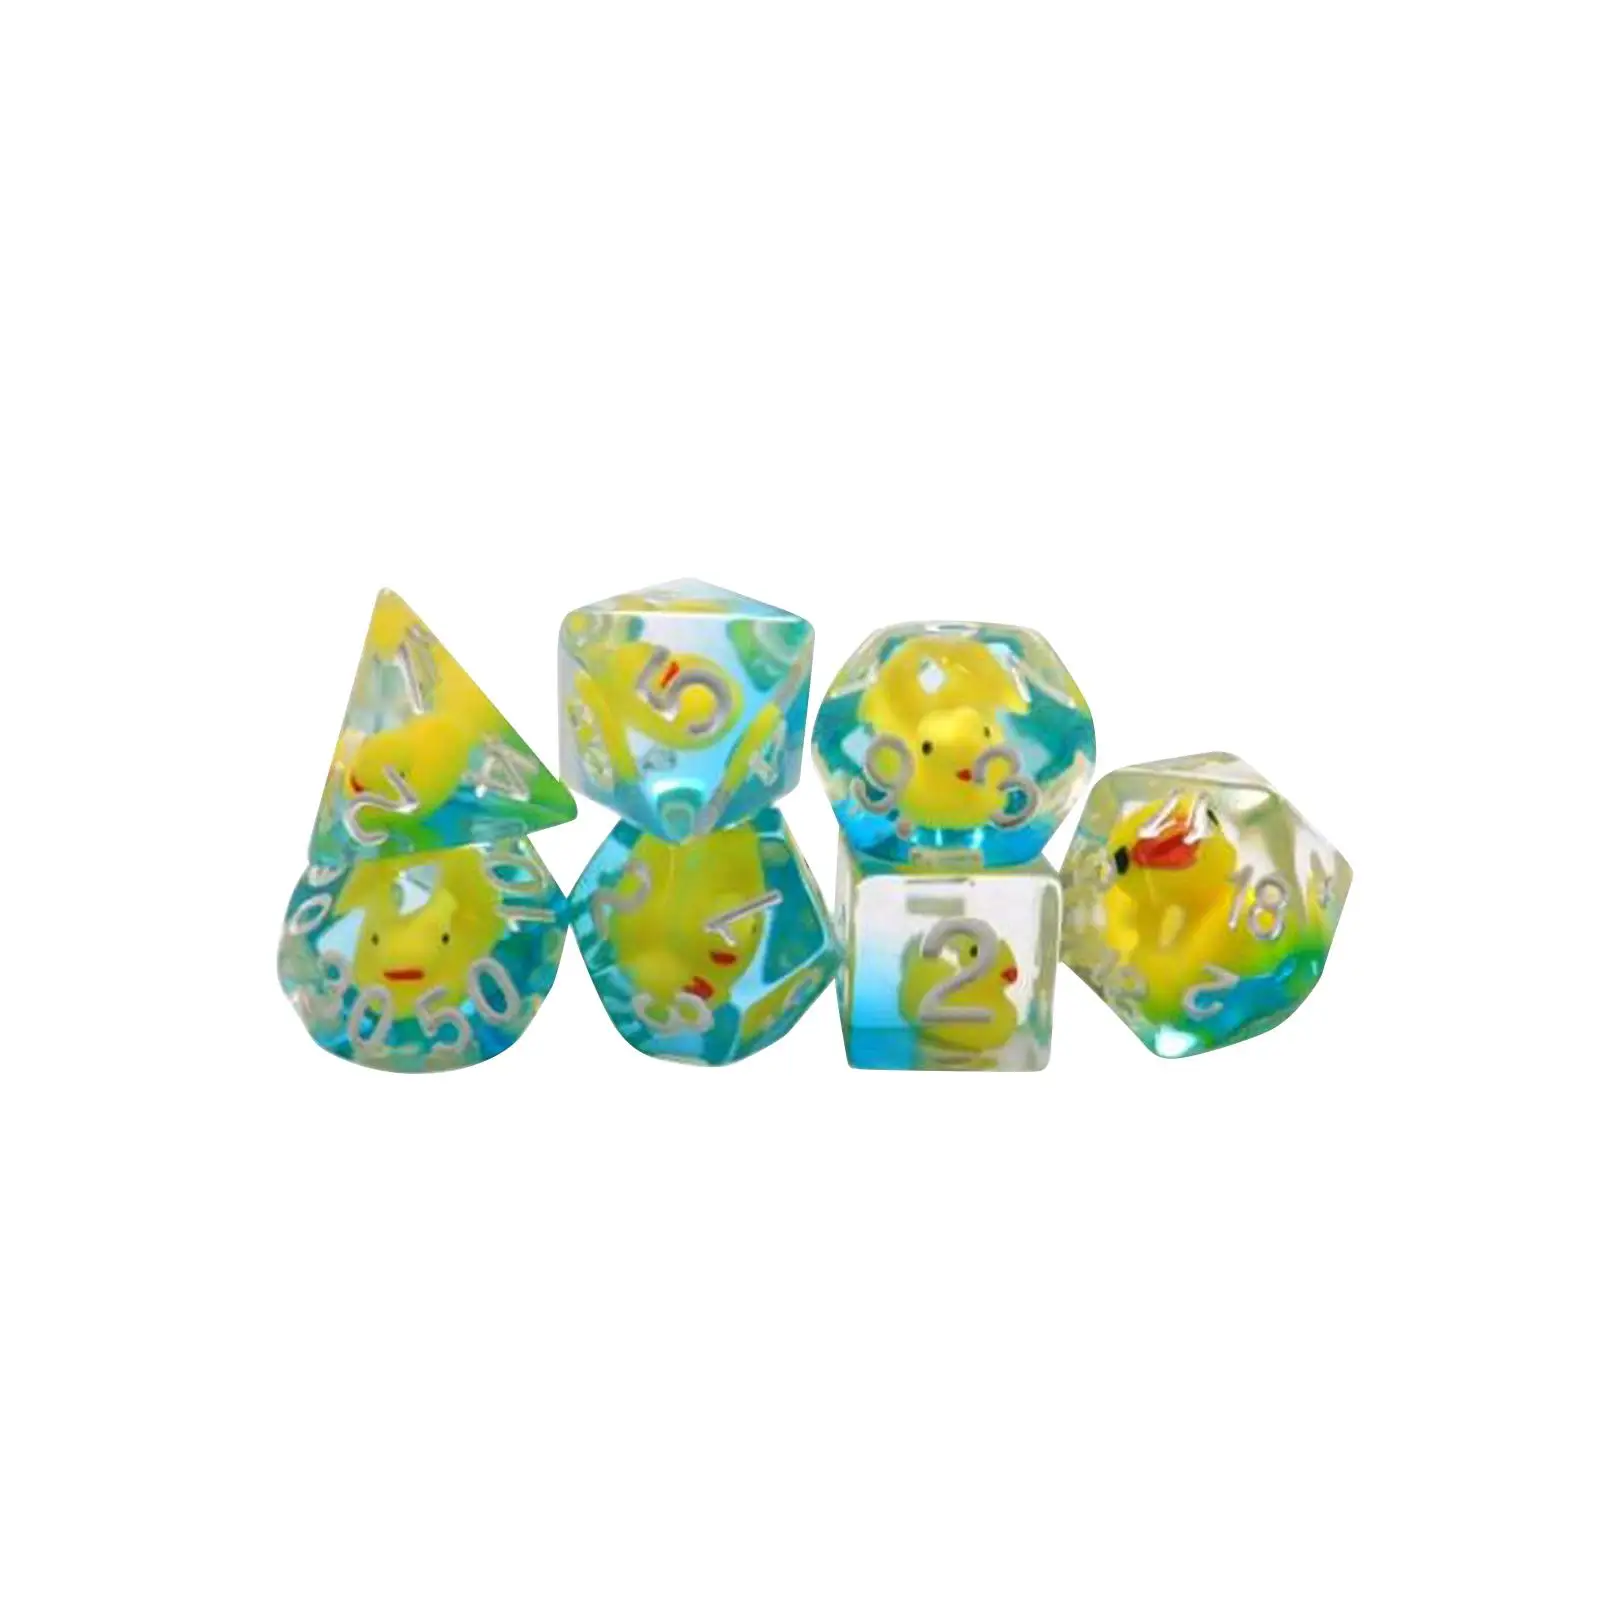 7x Multi Sided Dices D4 D8 D10 D12 D20 Entertainment Toys Filled with Ducks Animal Polyhedral Dices Set for Party KTV Board Game